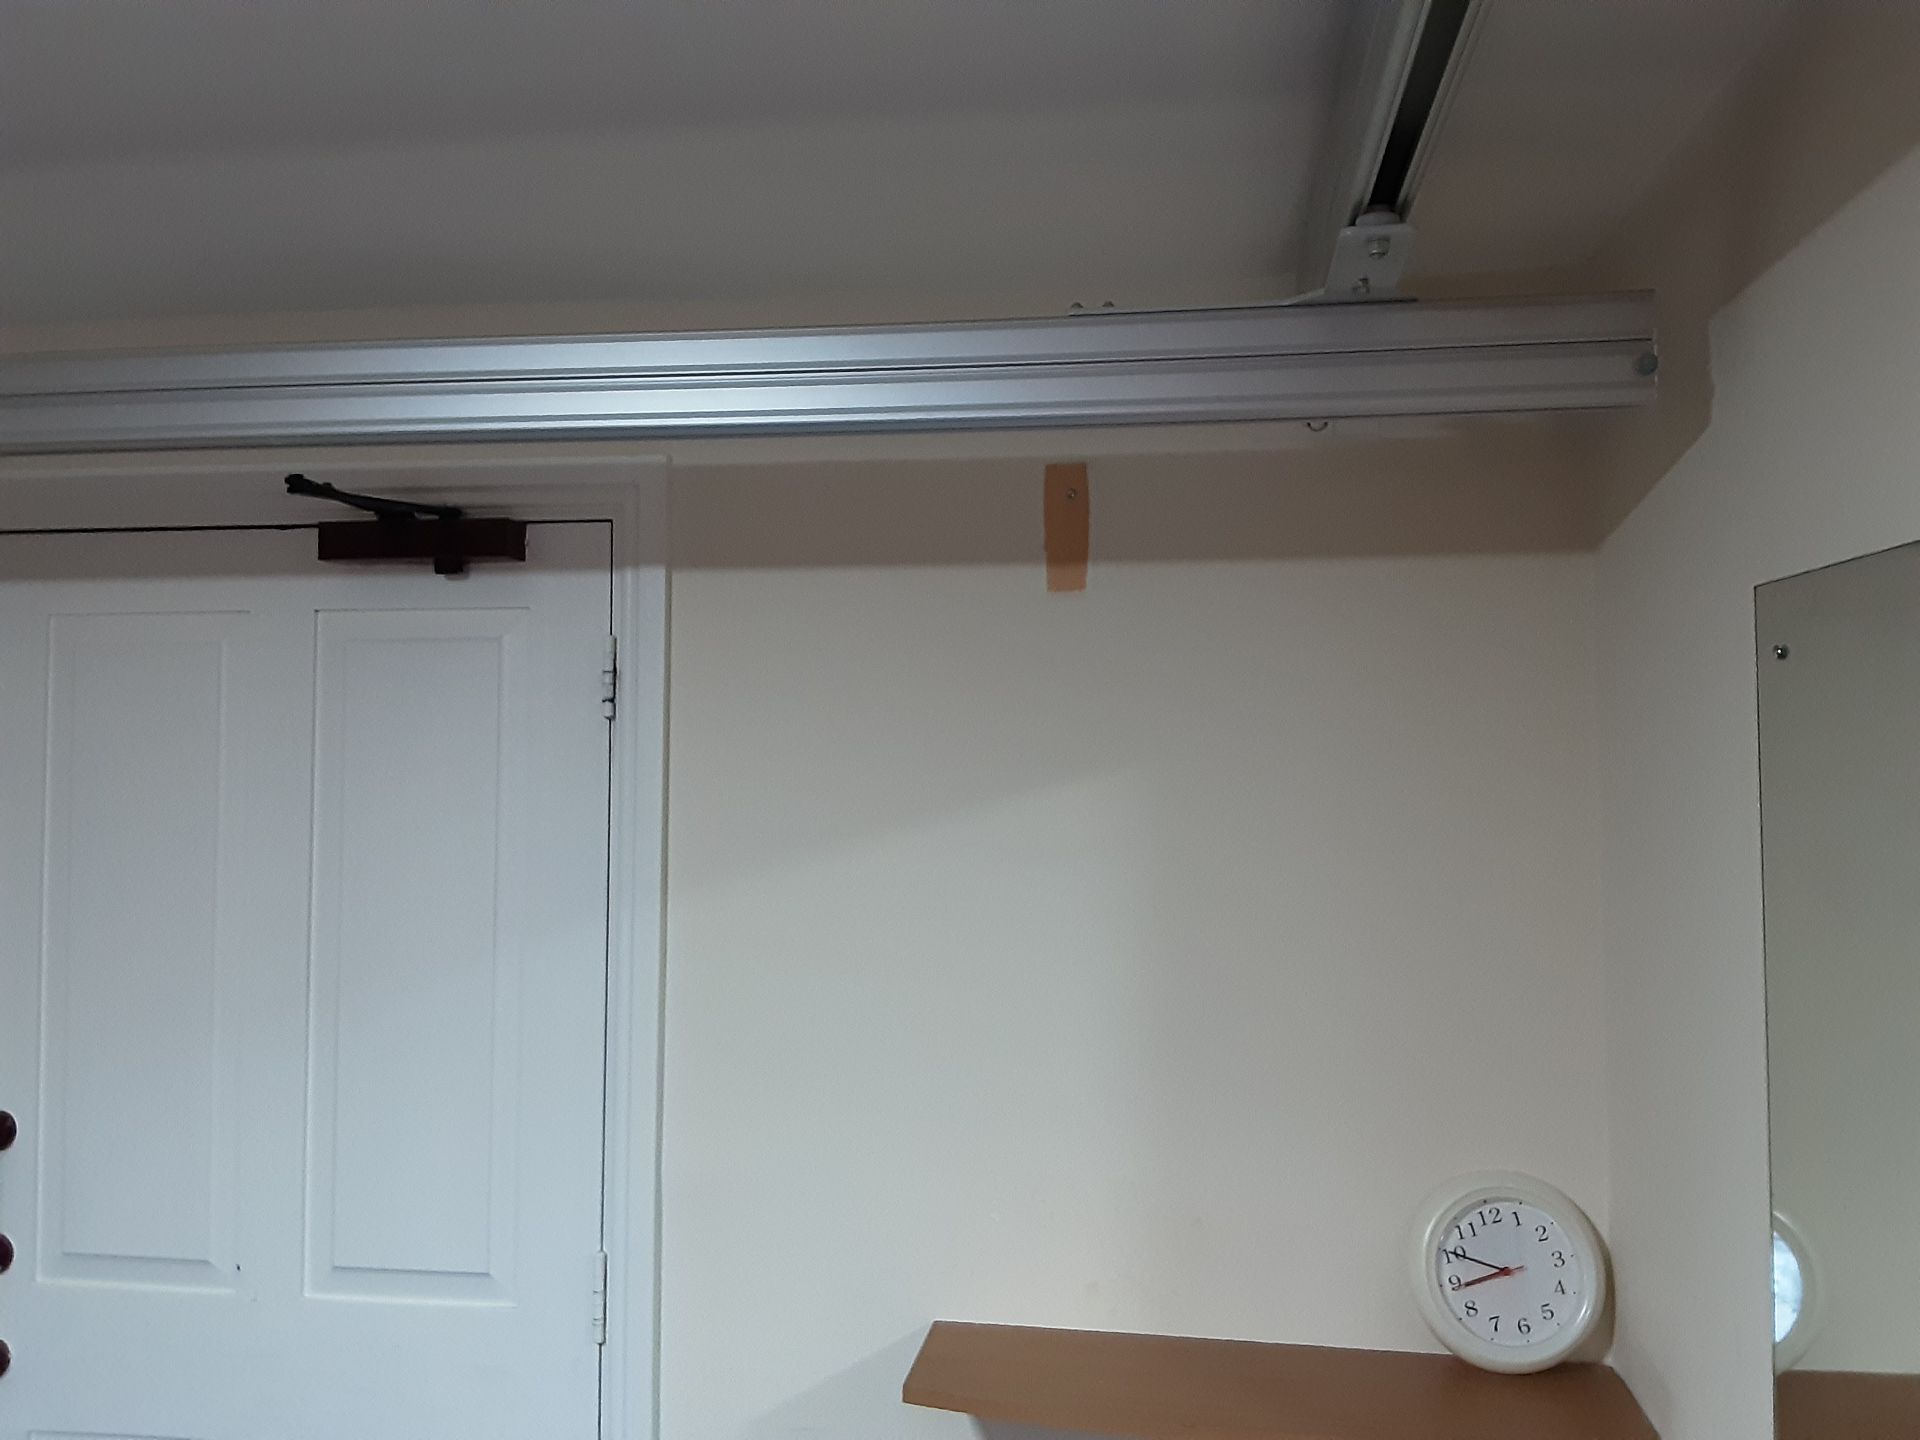 Likorall 242S R2R 200kg Patient Lift with KwikTrak Ceiling Rail System Serial No: 800828 - Image 3 of 10